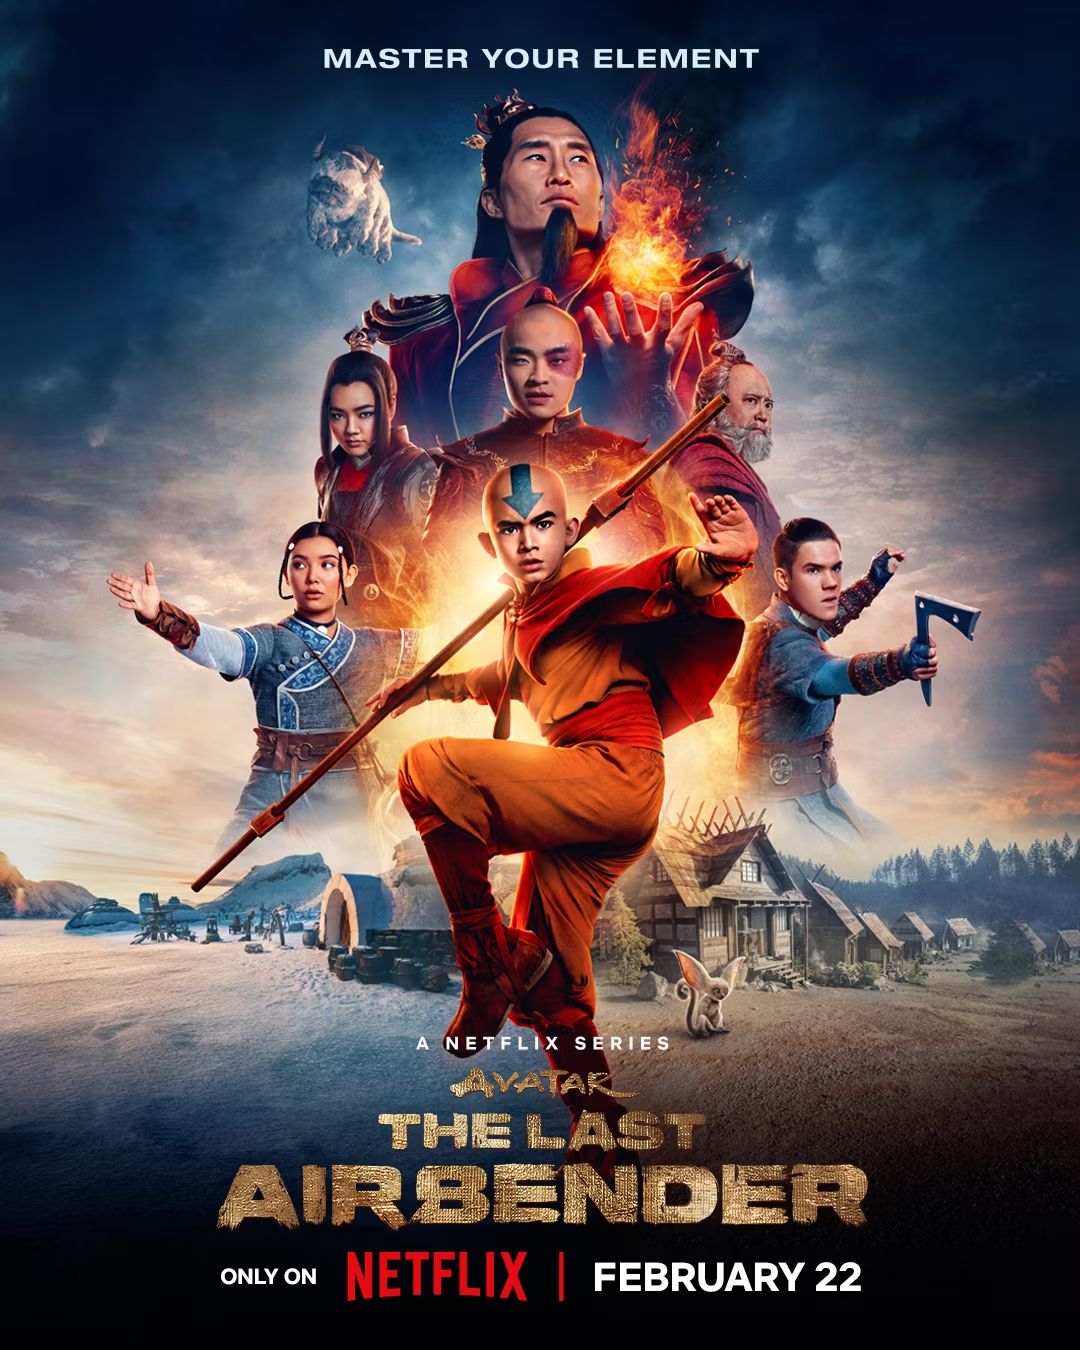 Live Action Avatar: The Last Airbender